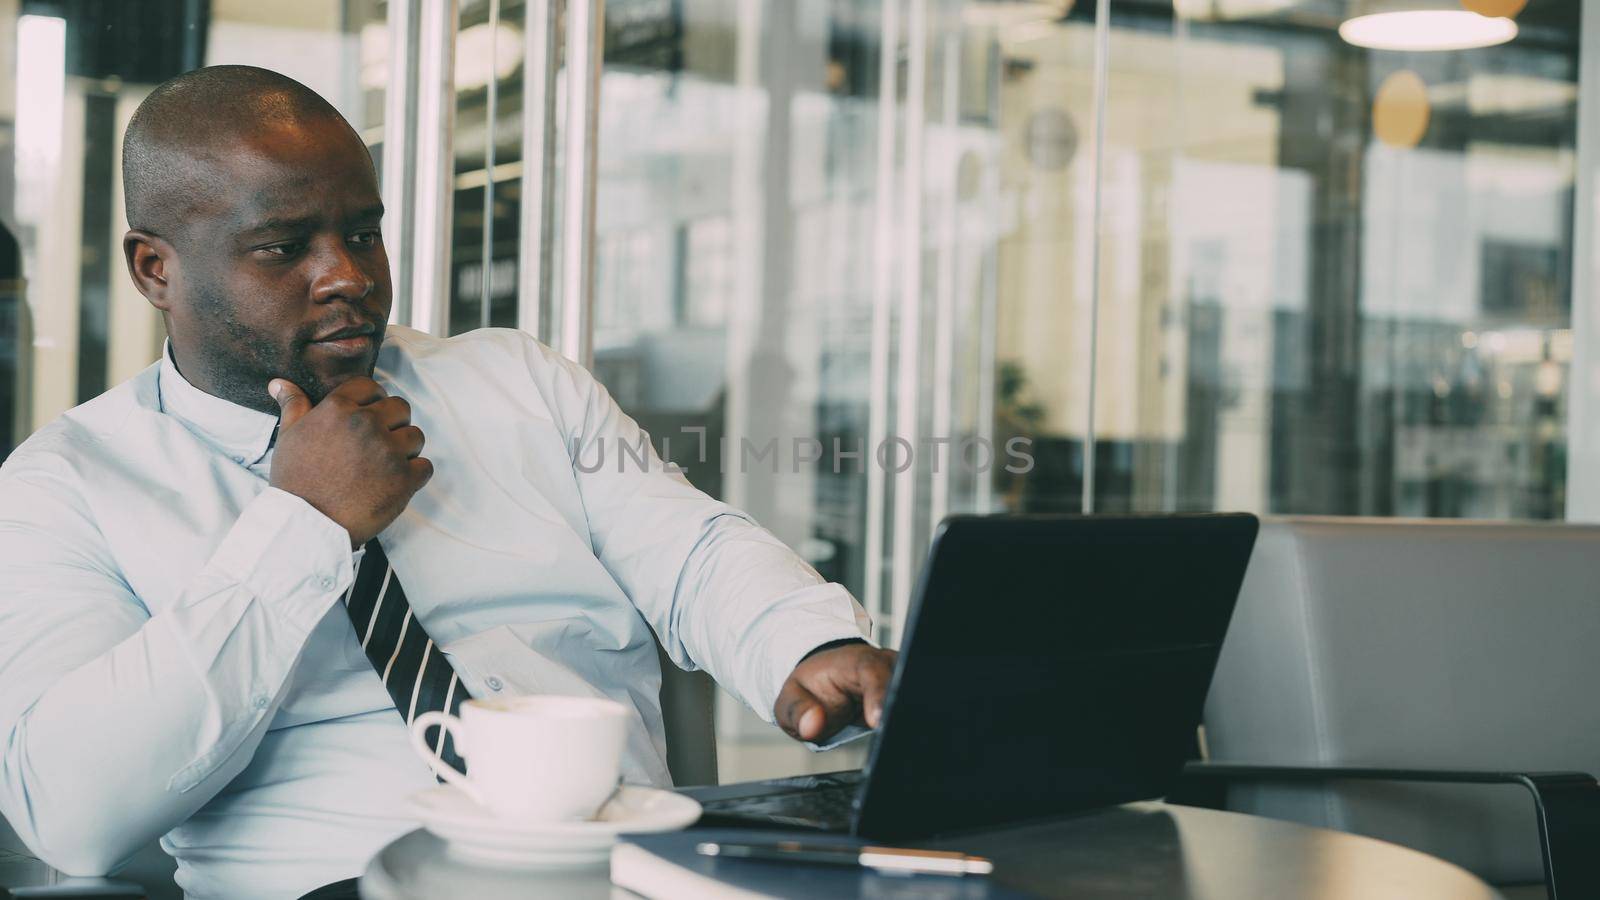 African American businessman thinking, printing and working on his laptop in glassy cafe during lunch break. He is brainstorming breakthrough ideas. by silverkblack